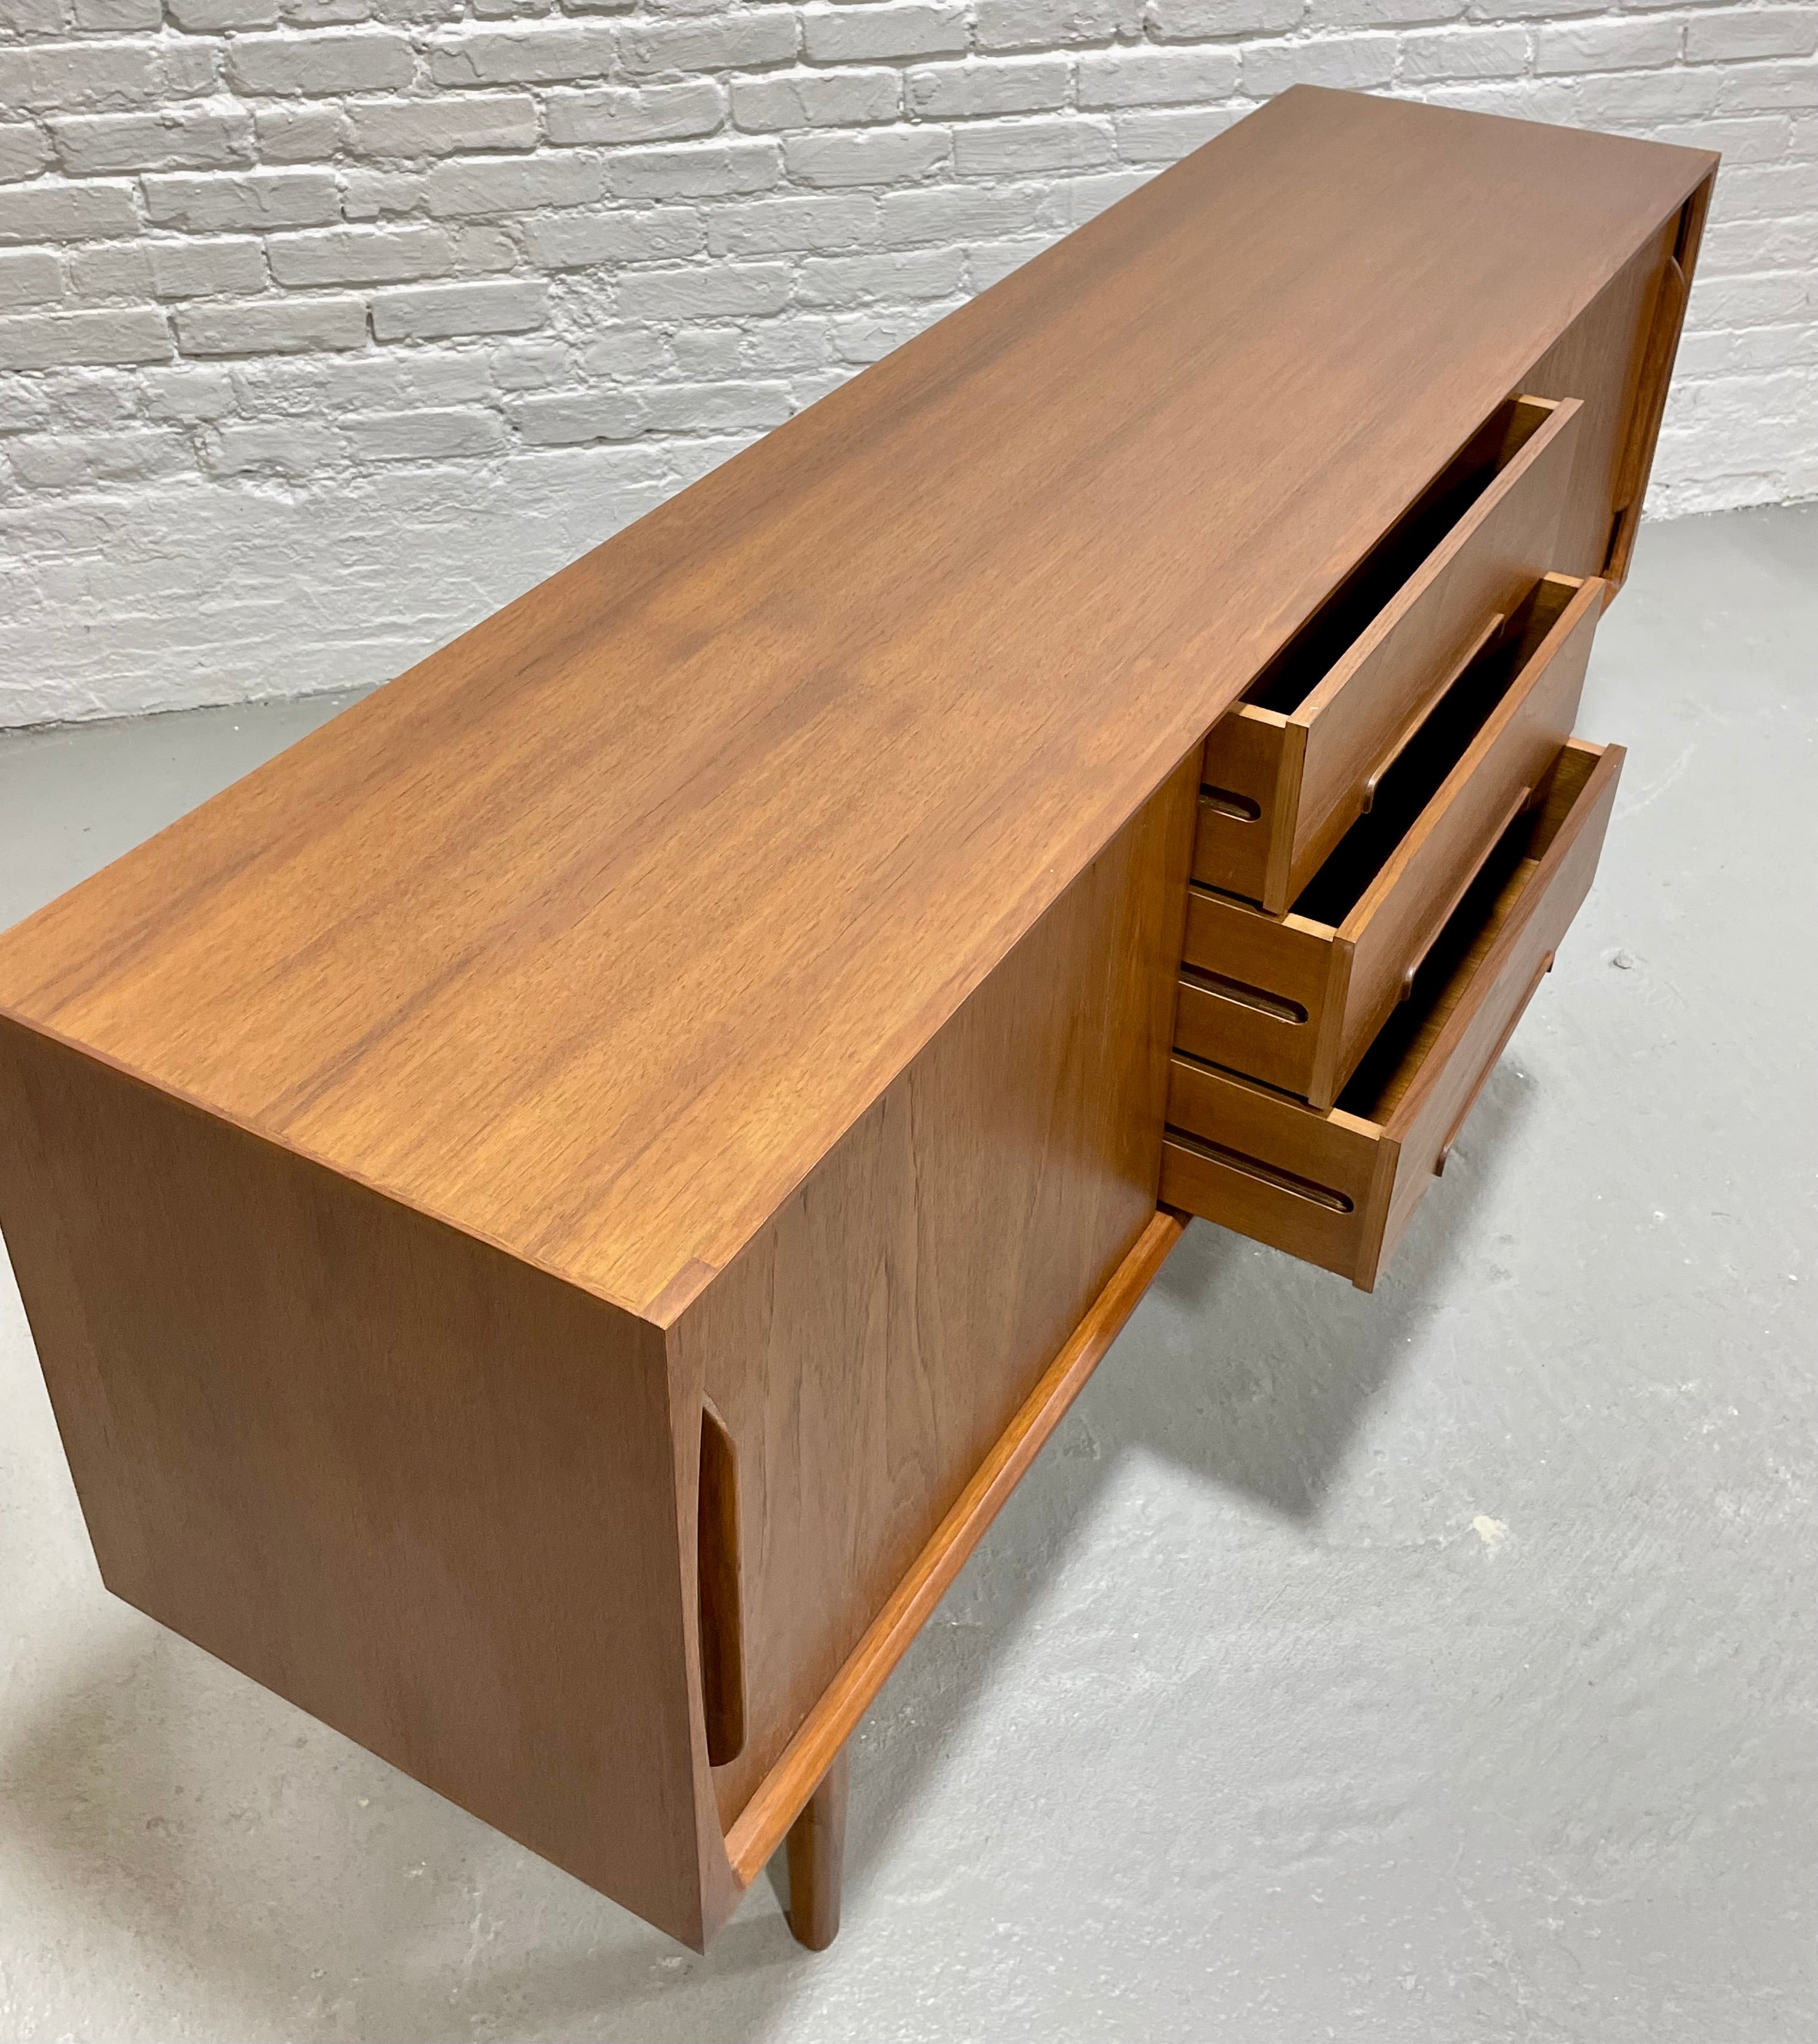 CLASSIC Mid Century MODERN styled Danish CREDENZA / Media Stand / Sideboard